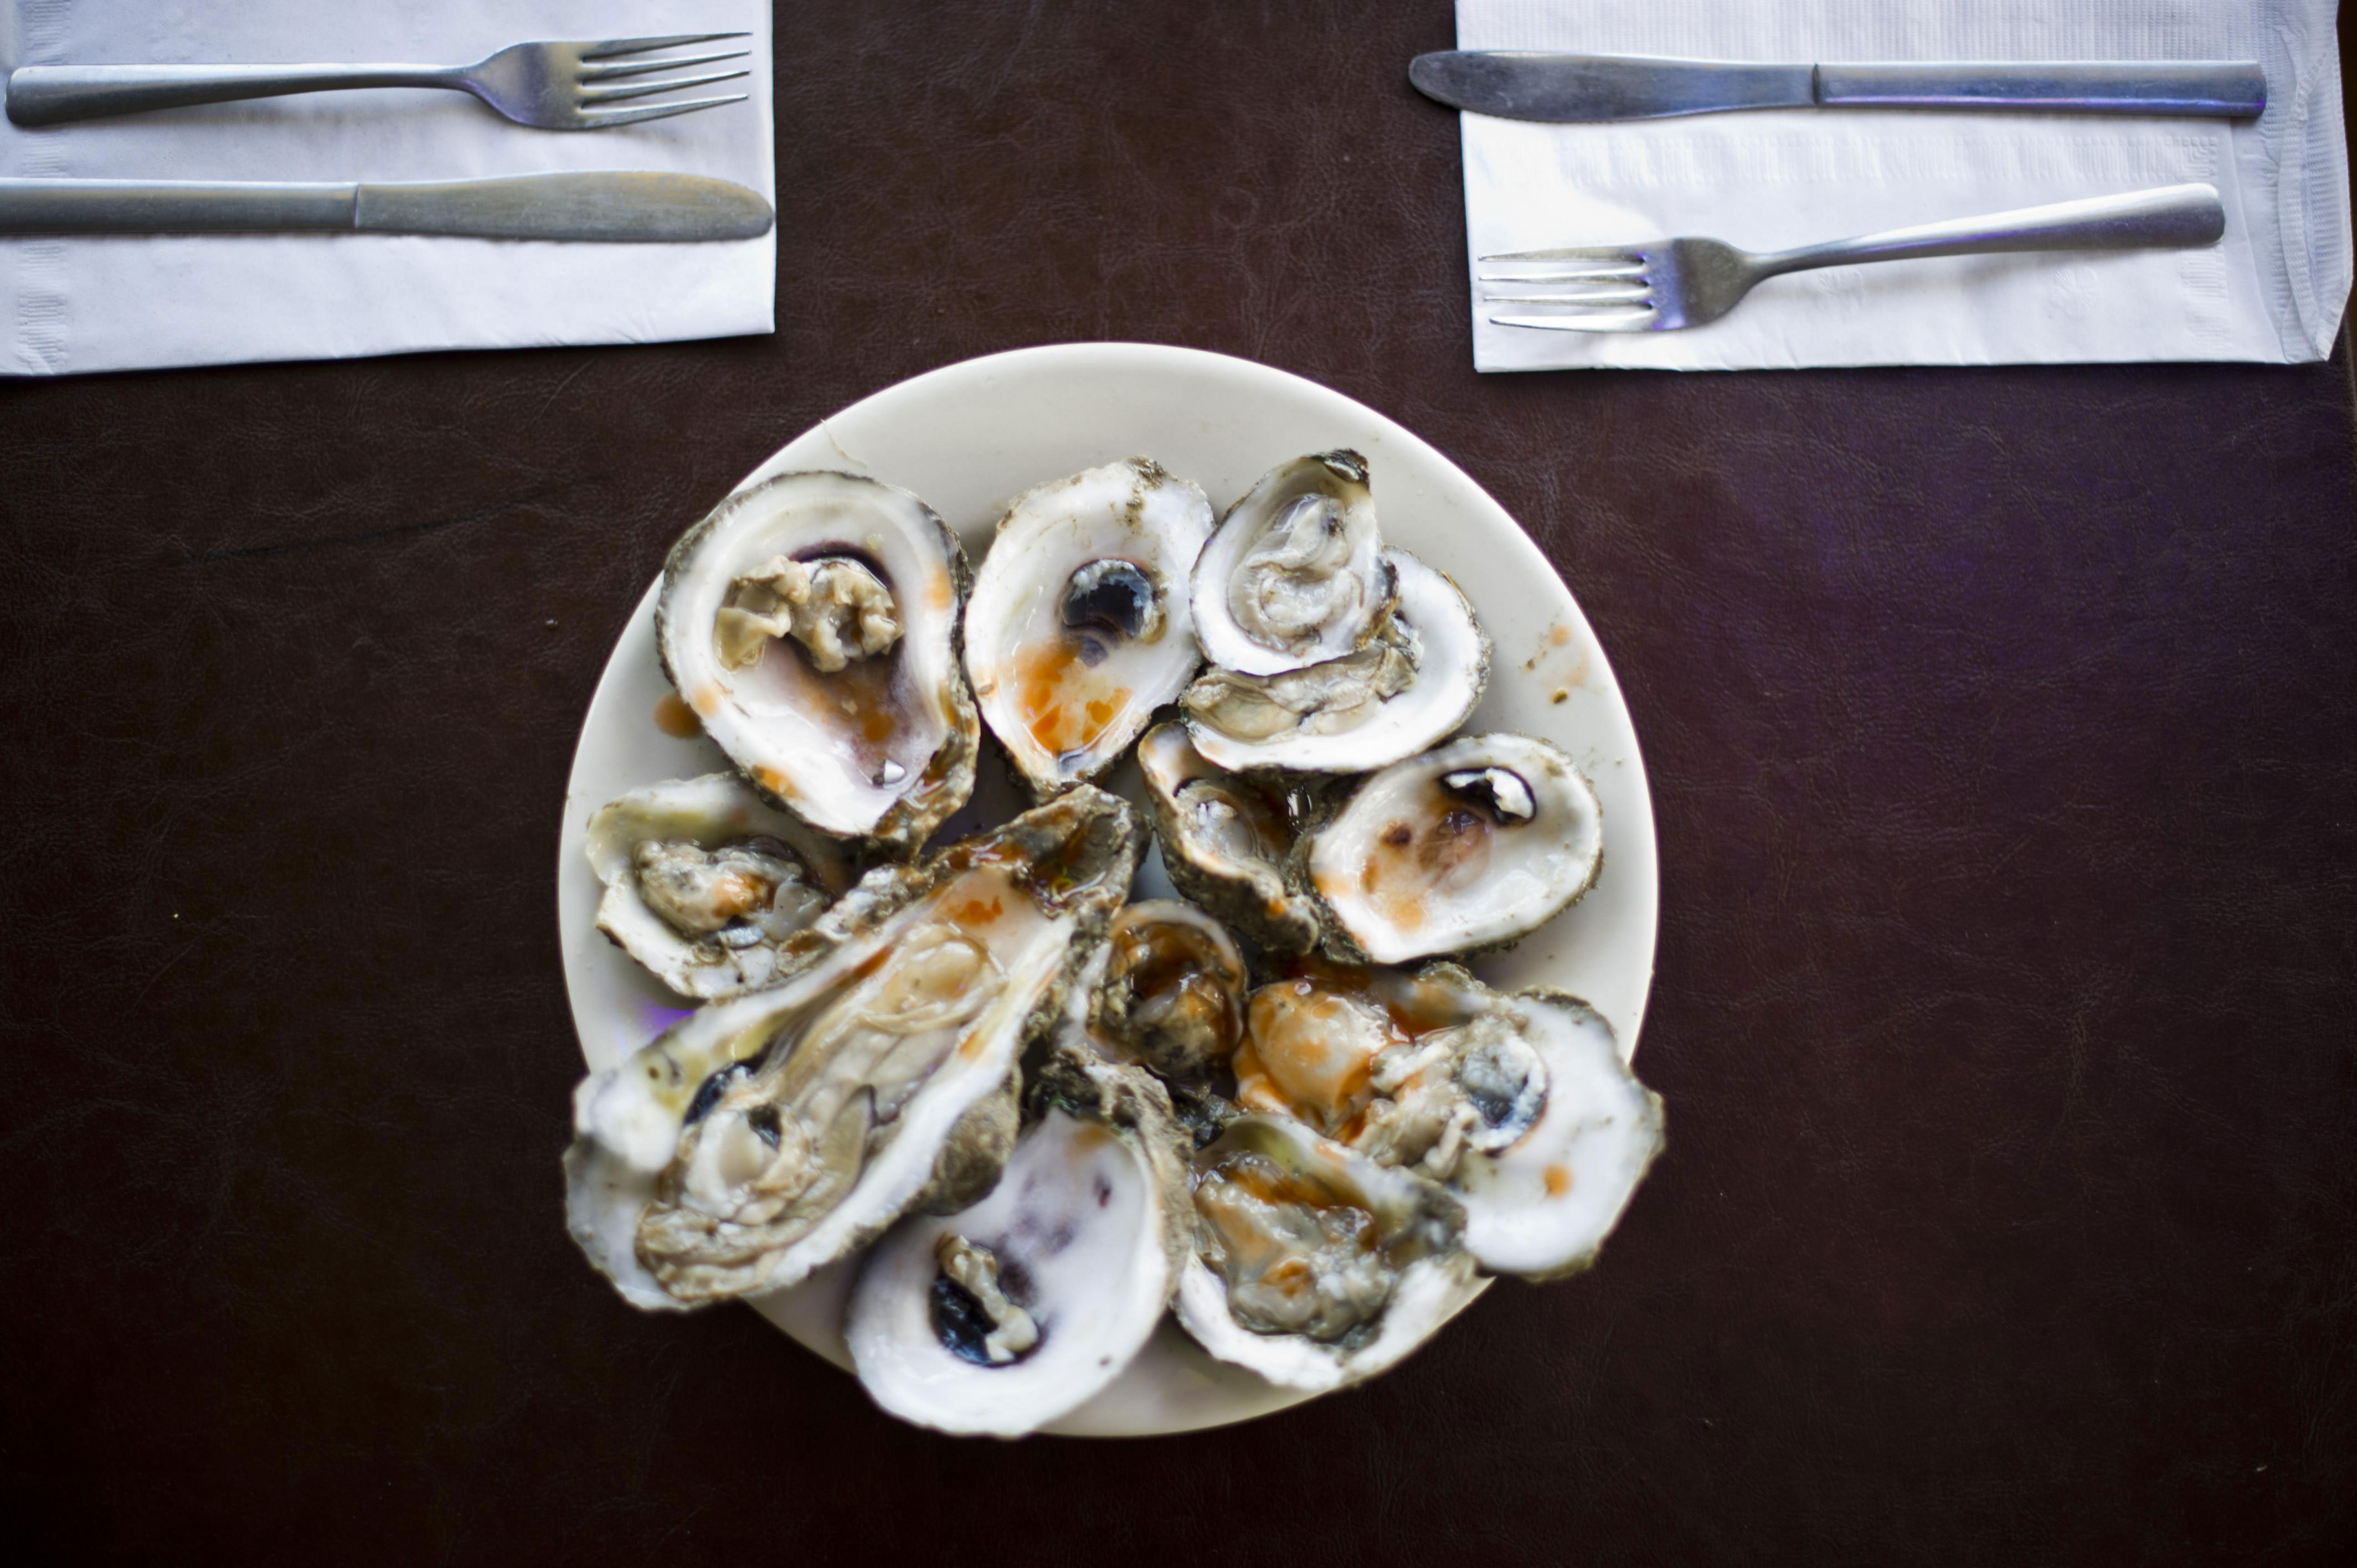 A plate full of oysters on the halfshell, viewed from directly above.